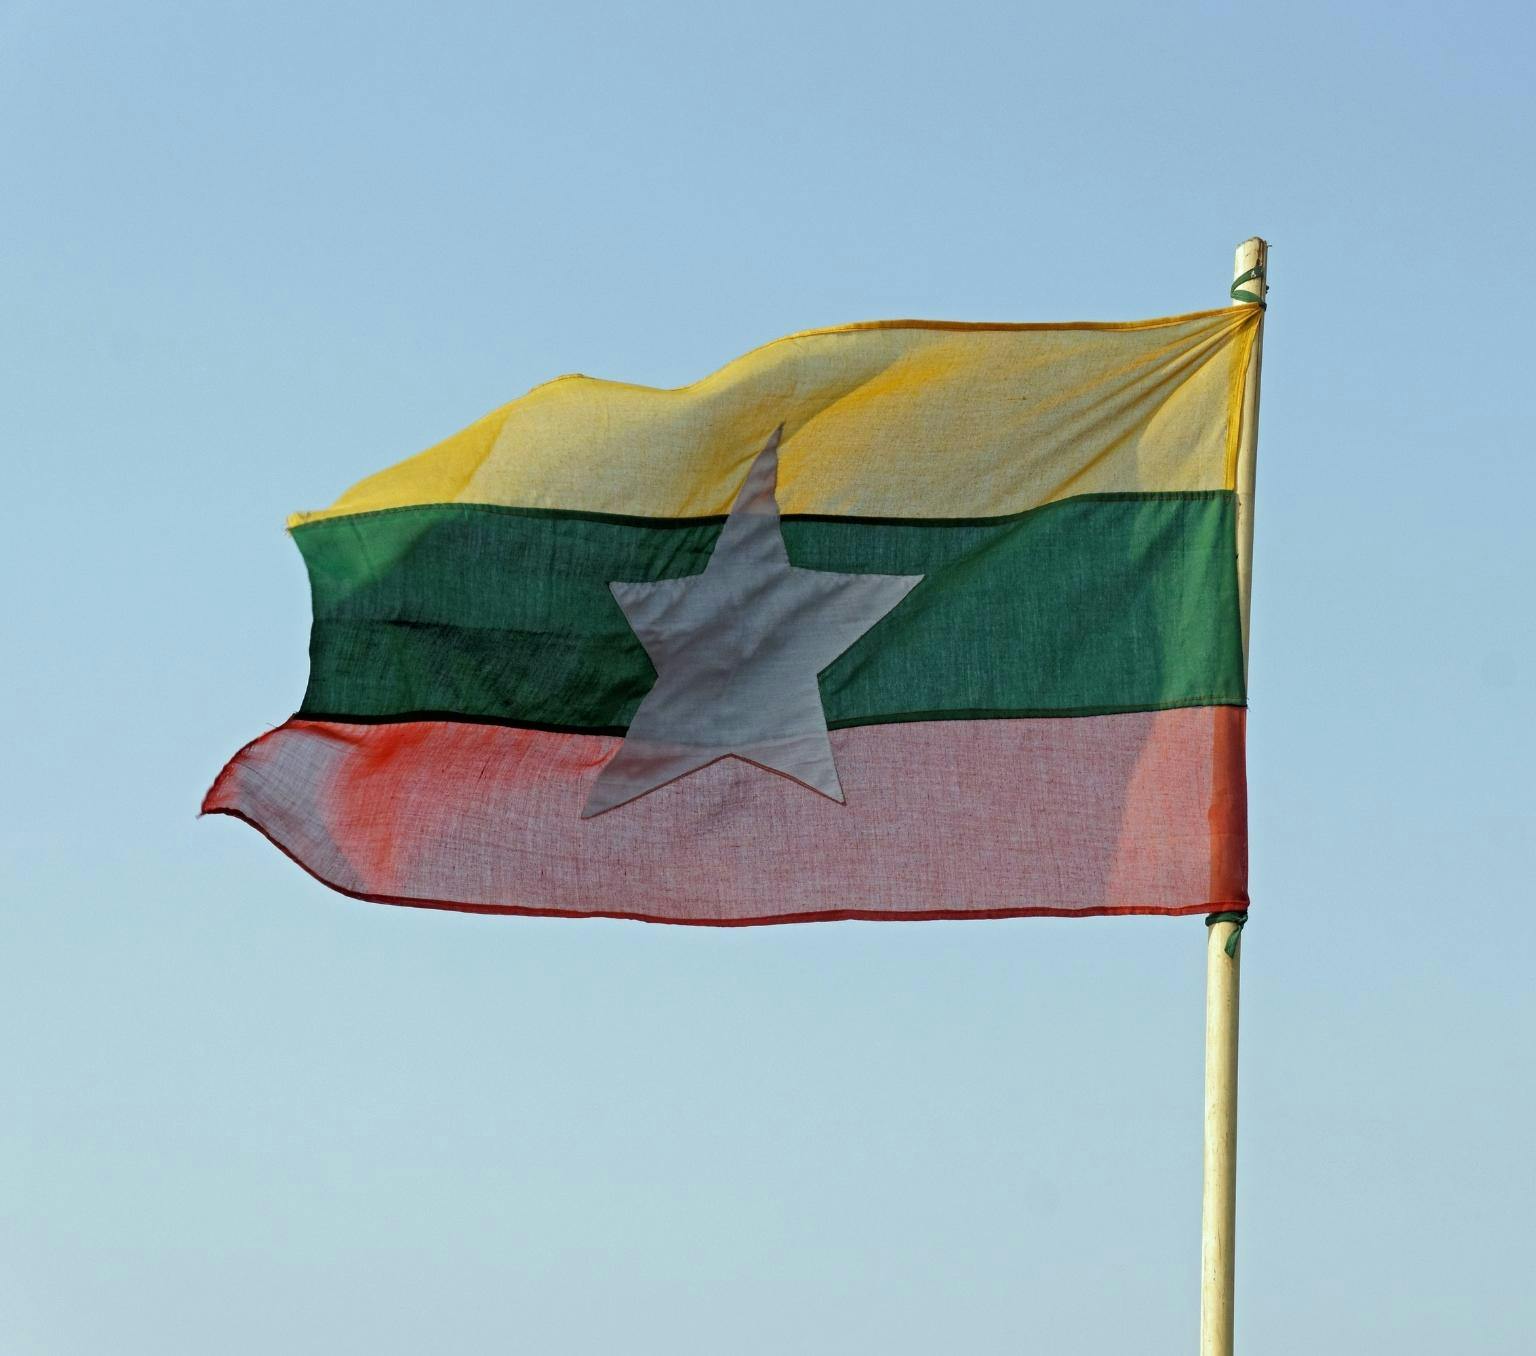 Myanmar flag which has a yellow, green and red horizontal stripe with a five pointed white star in the centre is pictured flying on a flag pole in front of a blue sky